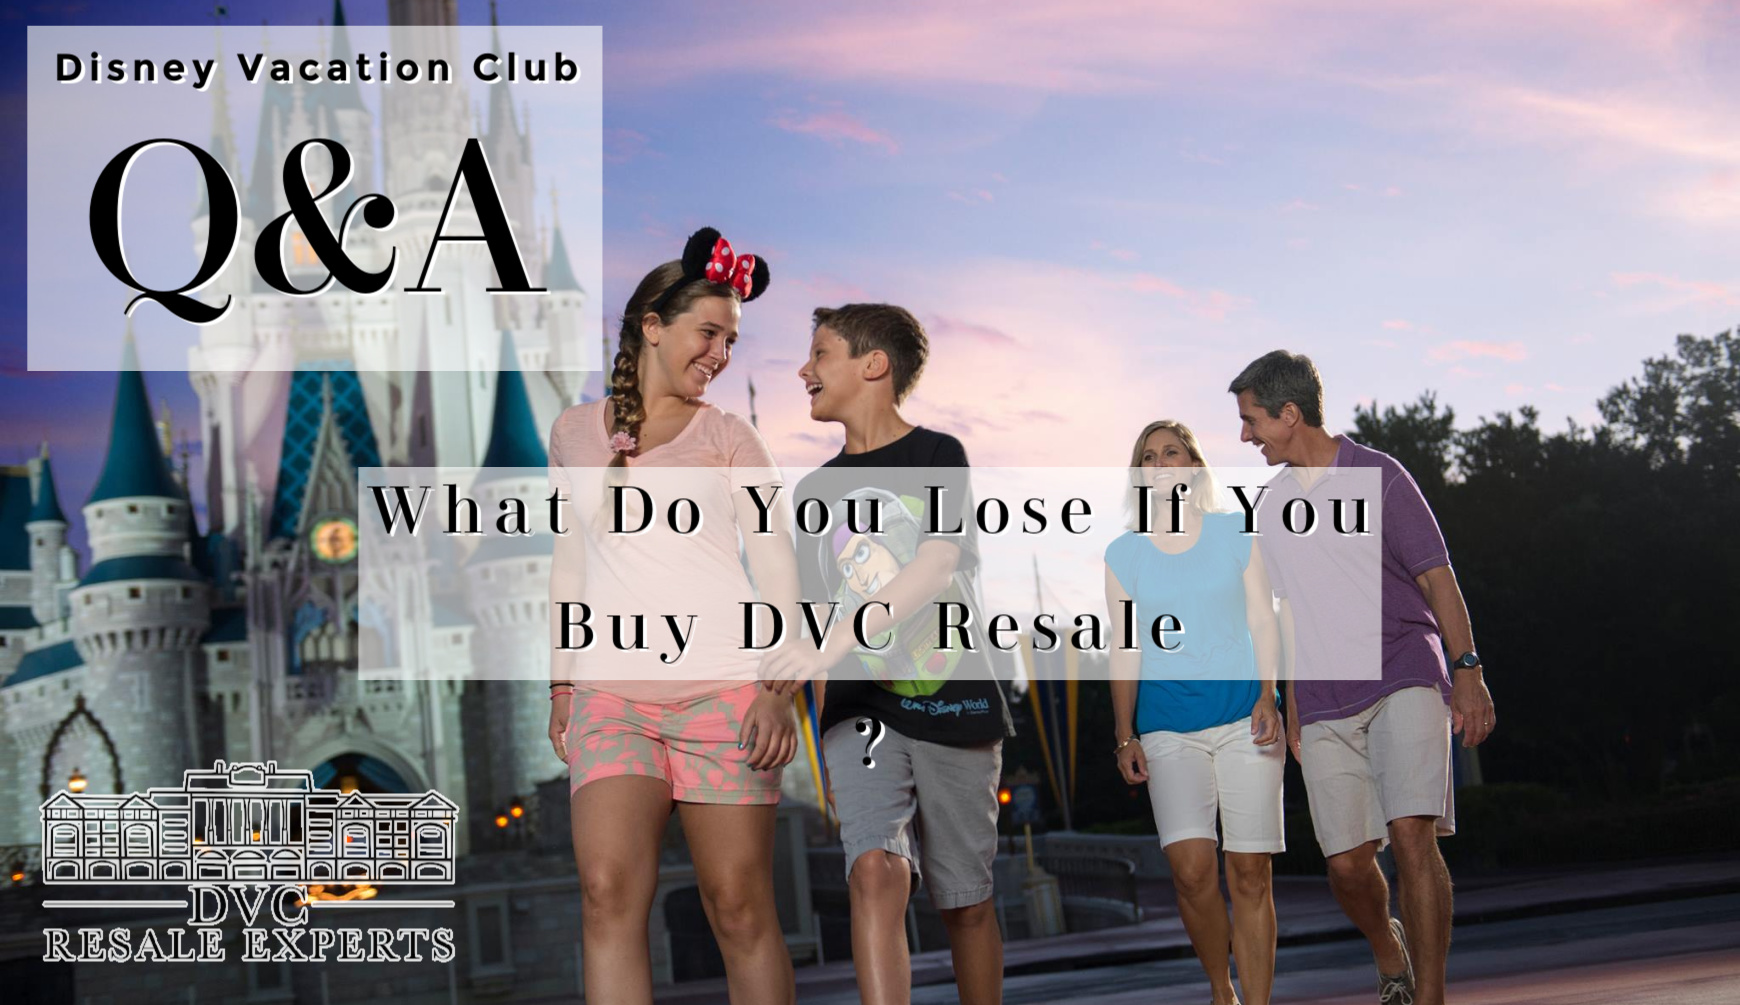 What Do You Lose If You Buy DVC Resale